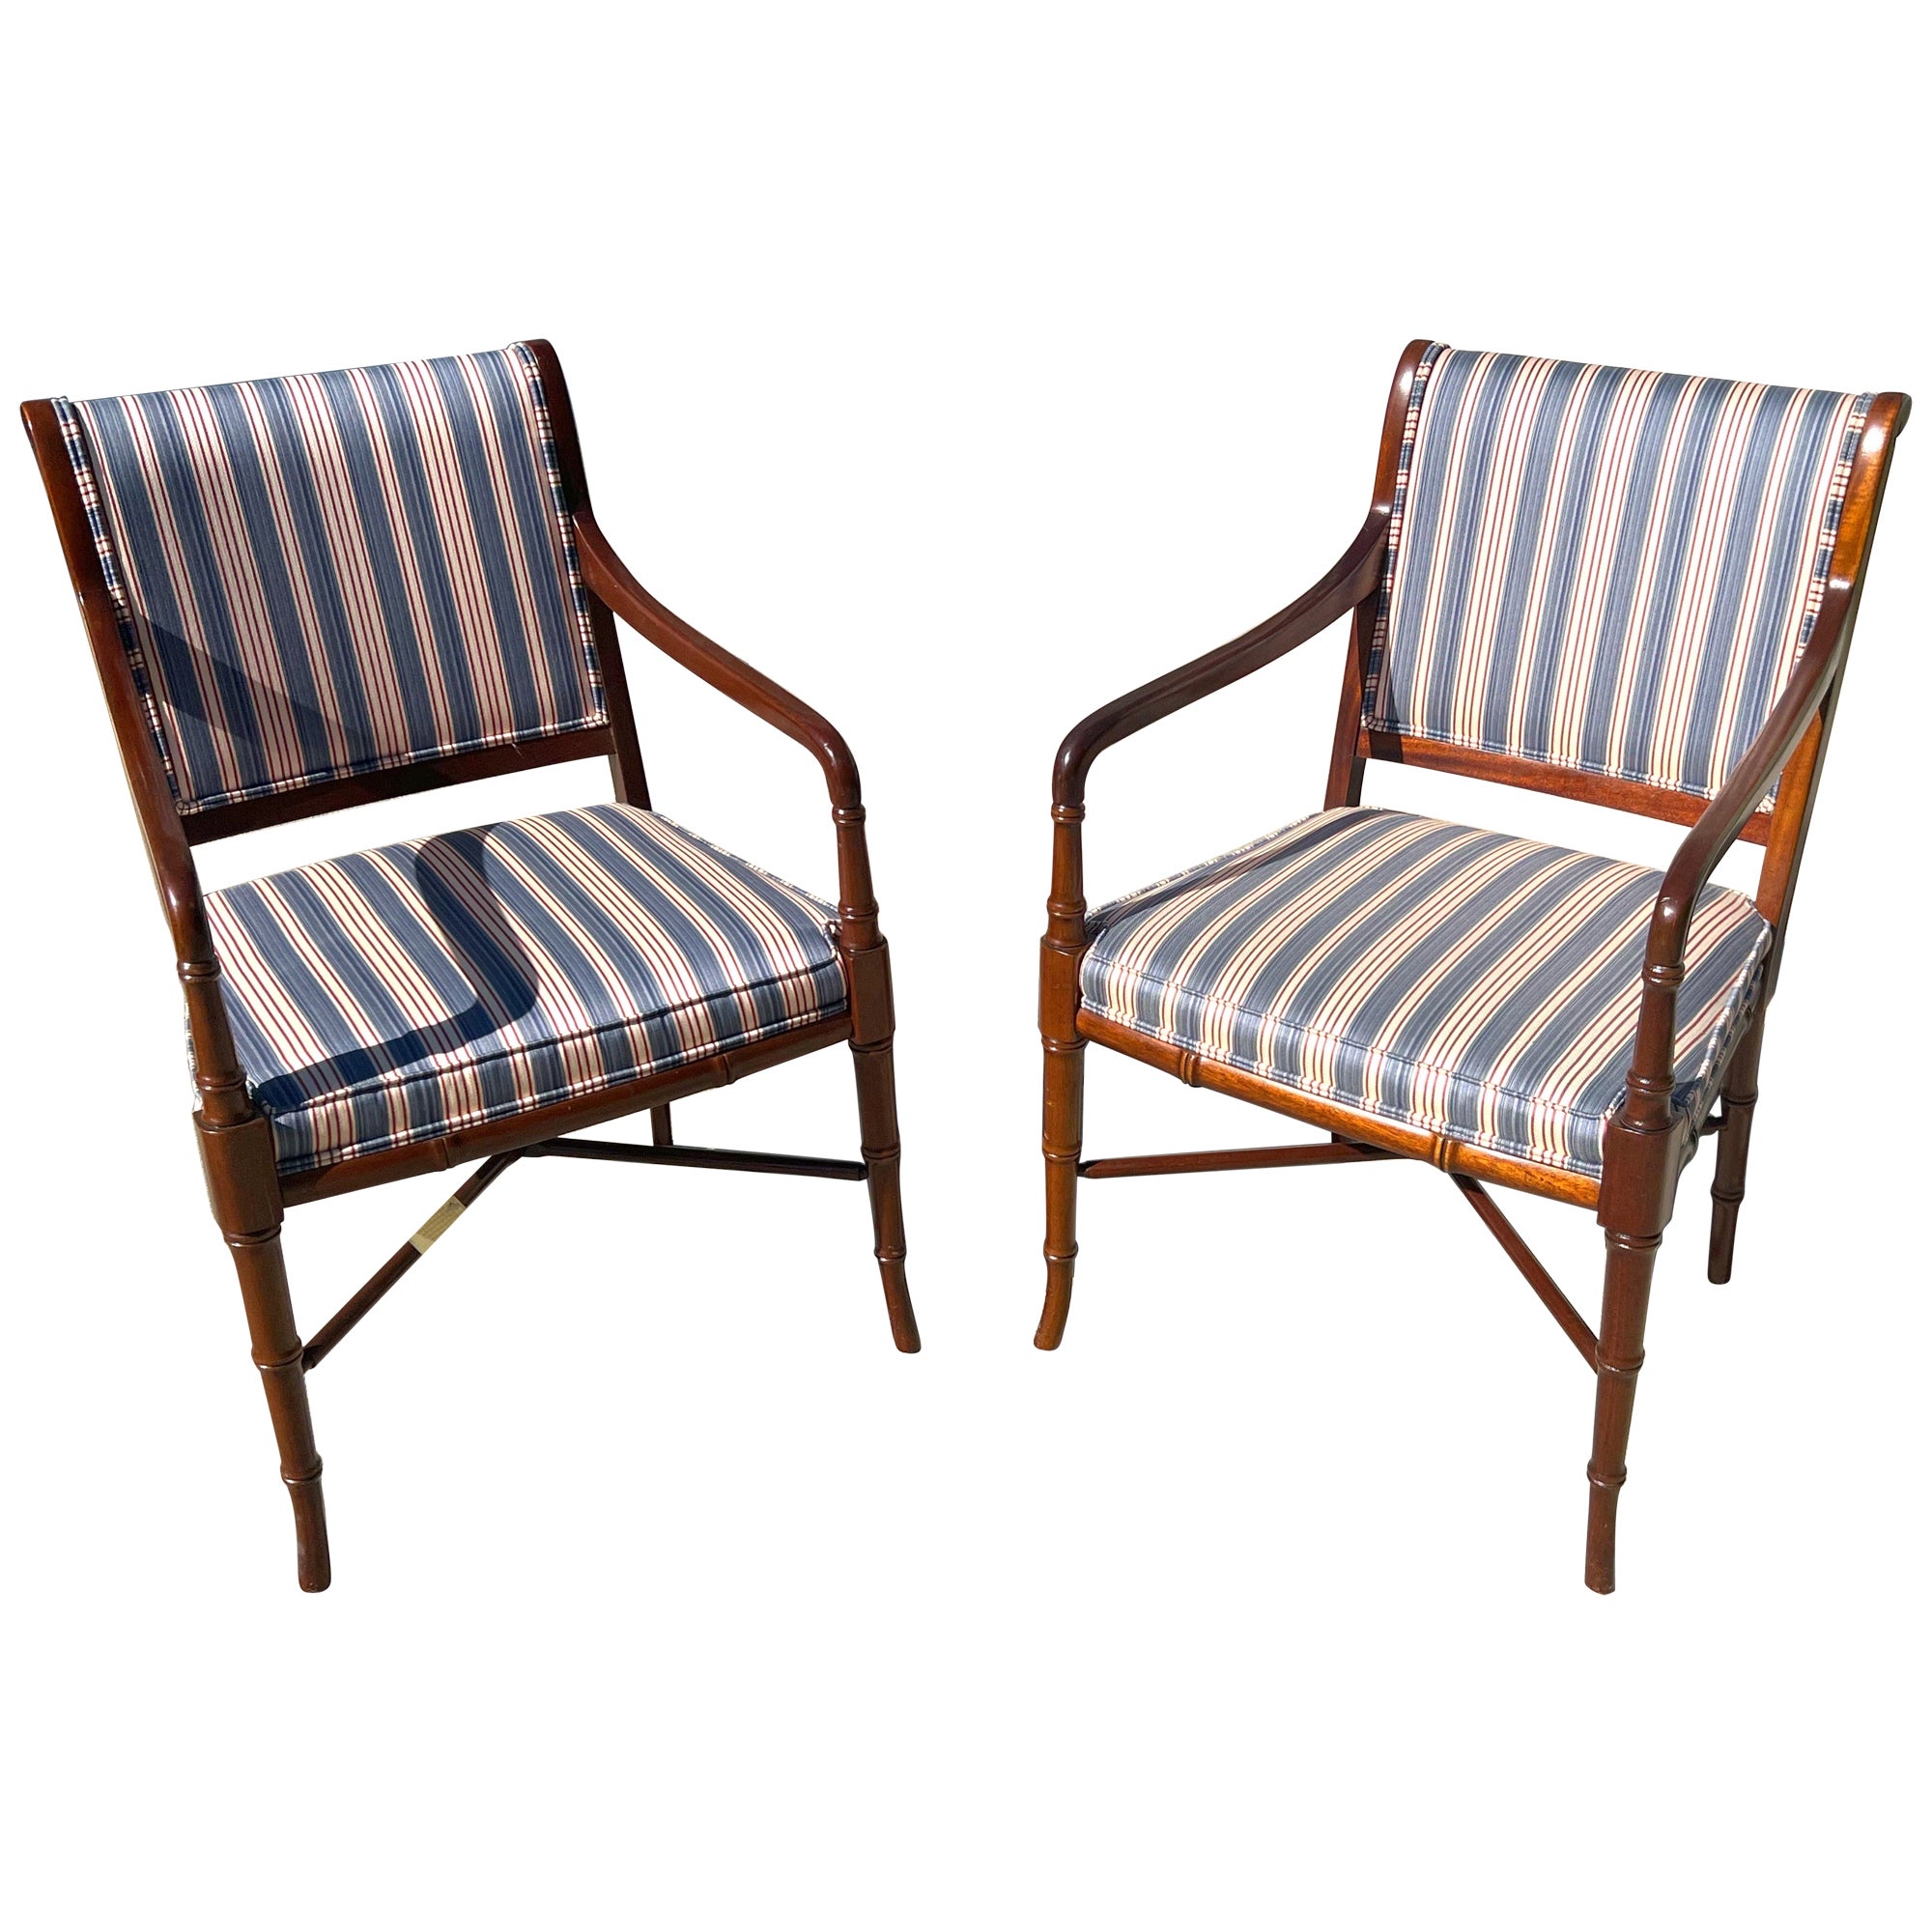 Vintage Faux Bamboo Regency Style Mahogany Armchairs - a Pair For Sale